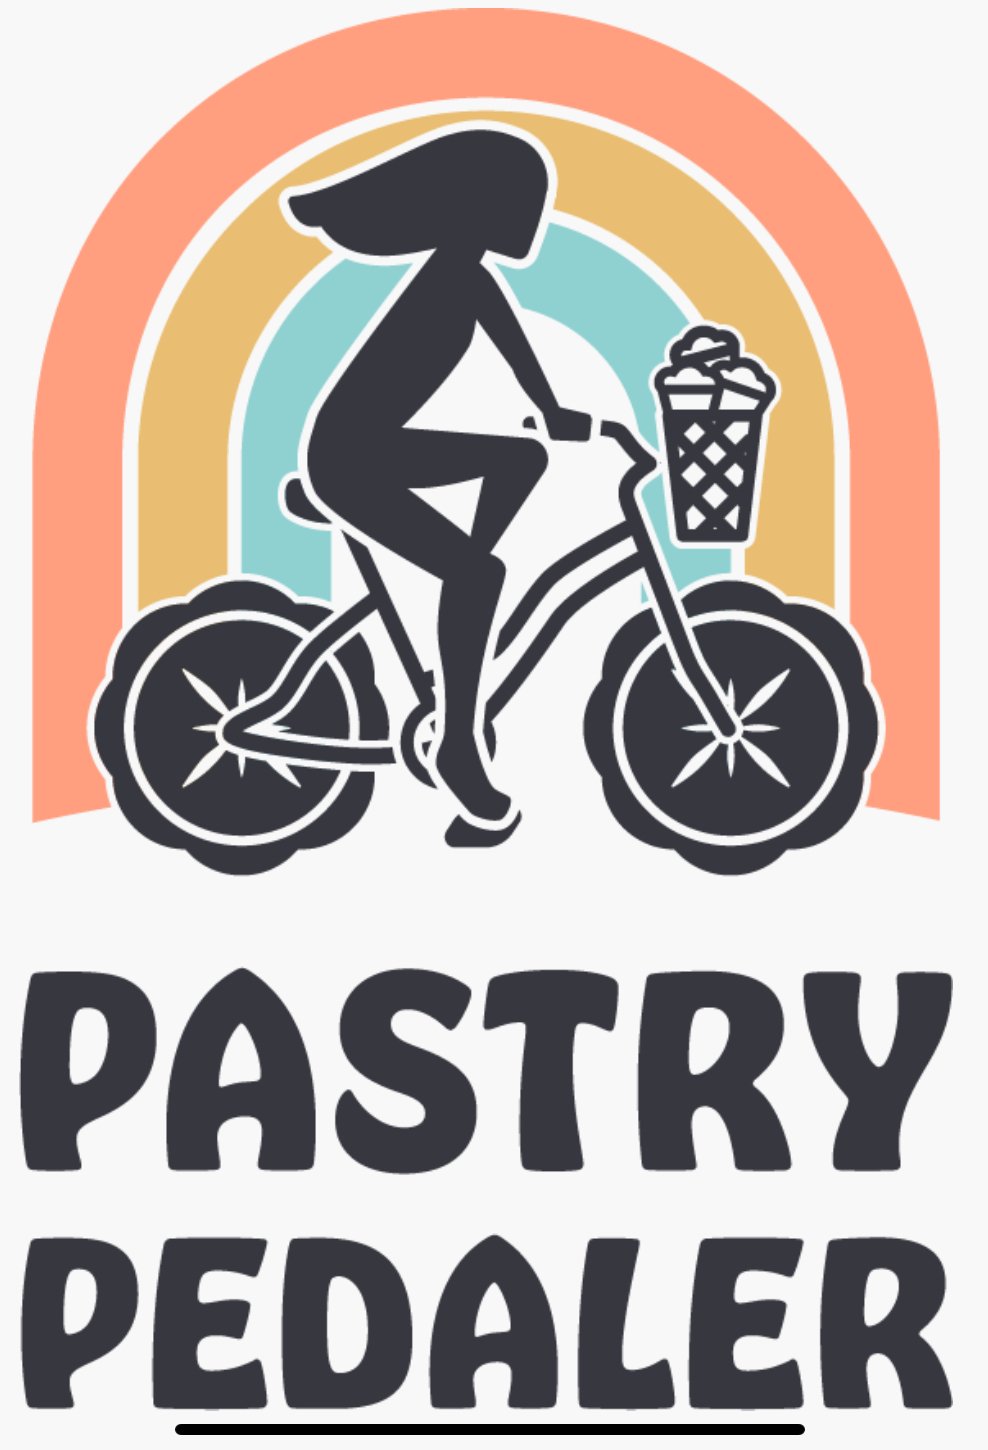 Pastry Pedaler